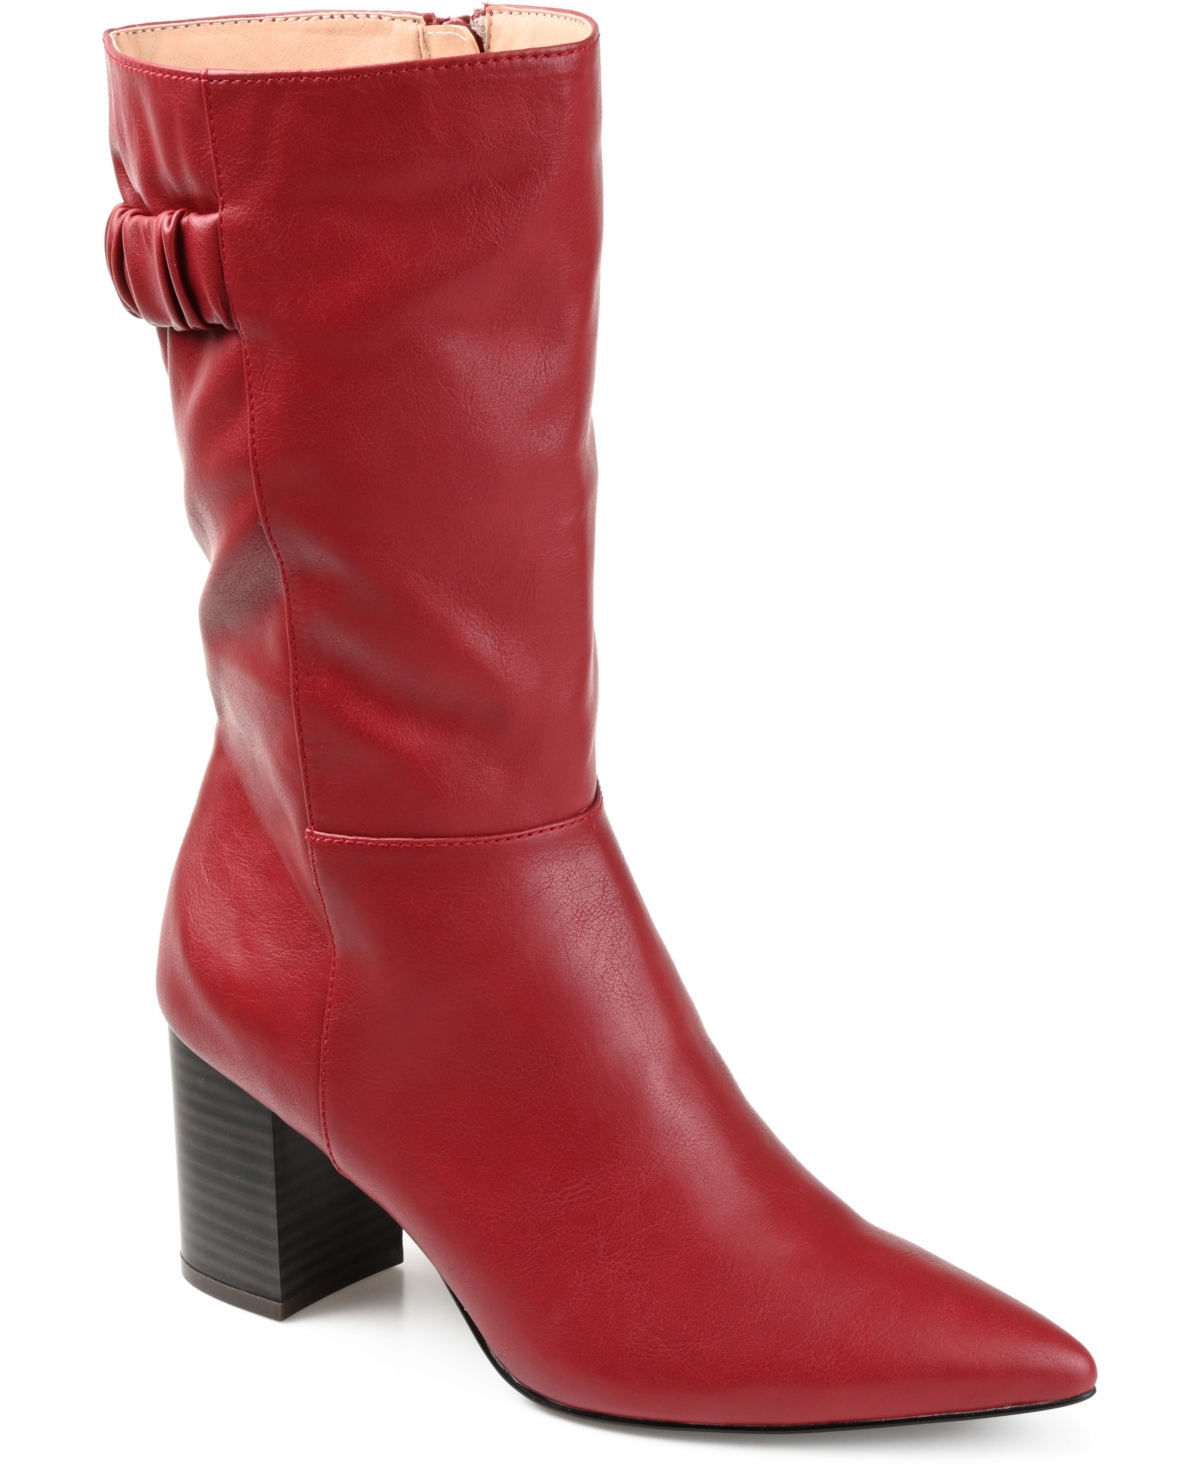 Vintage Style Shoes by Aerosoles Journee Collection Womens Wilo Wide Calf Boots - Red $99.99 AT vintagedancer.com